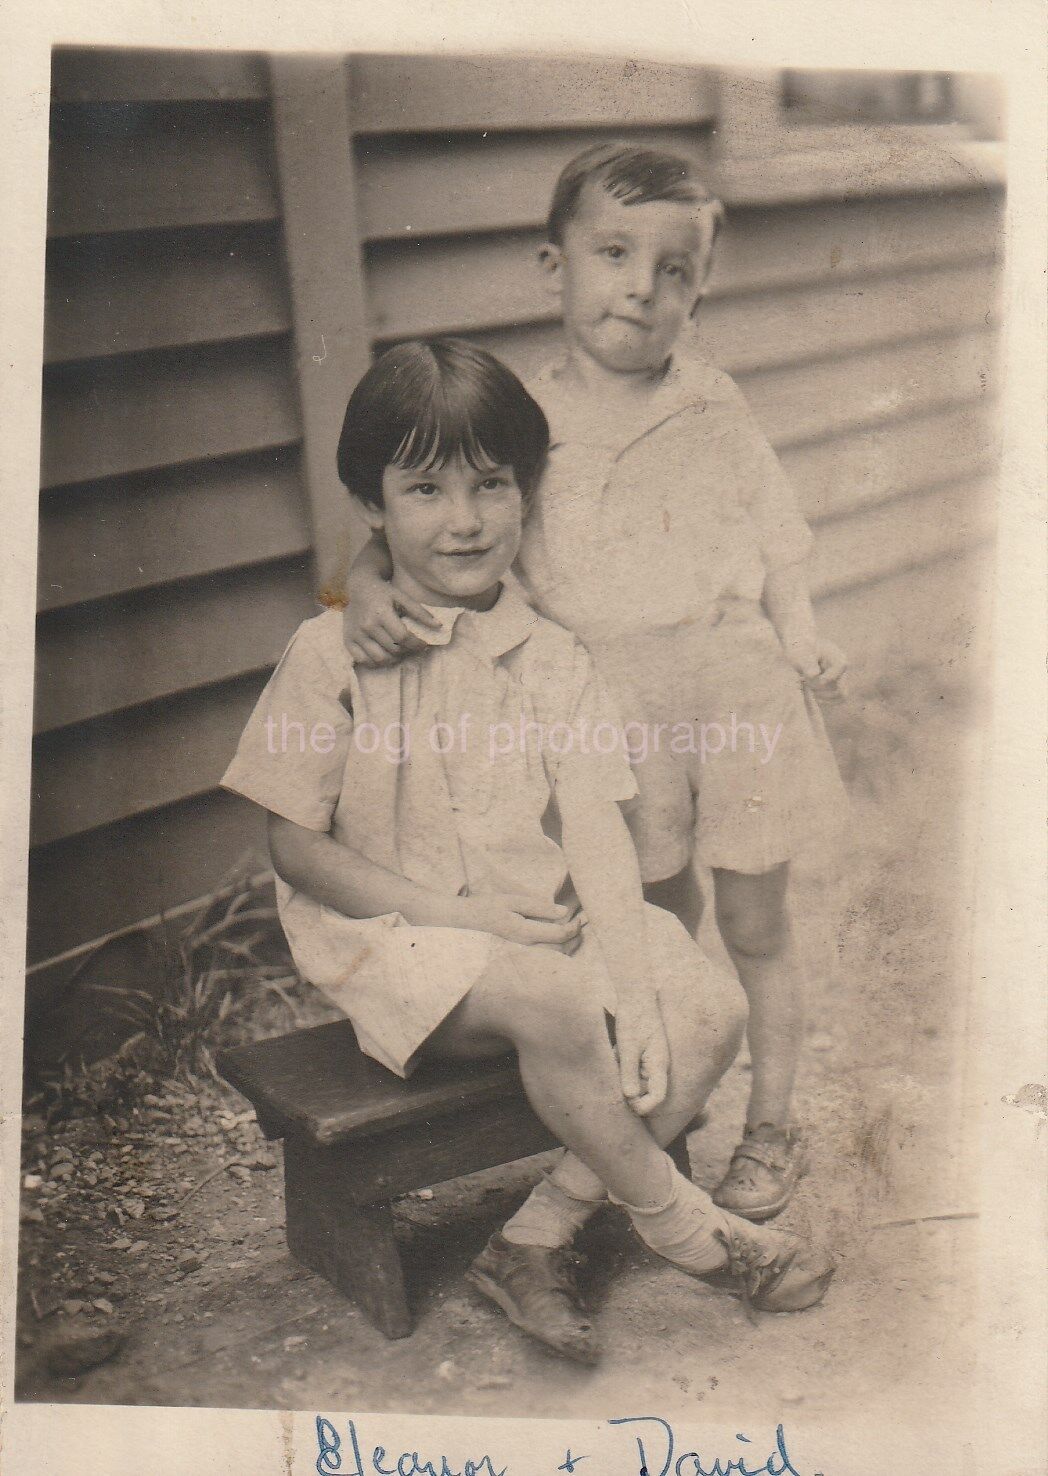 ELEANOR AND DAVID Found Photo Poster paintingGRAPH bwSnapshot VINTAGE 810 5 W